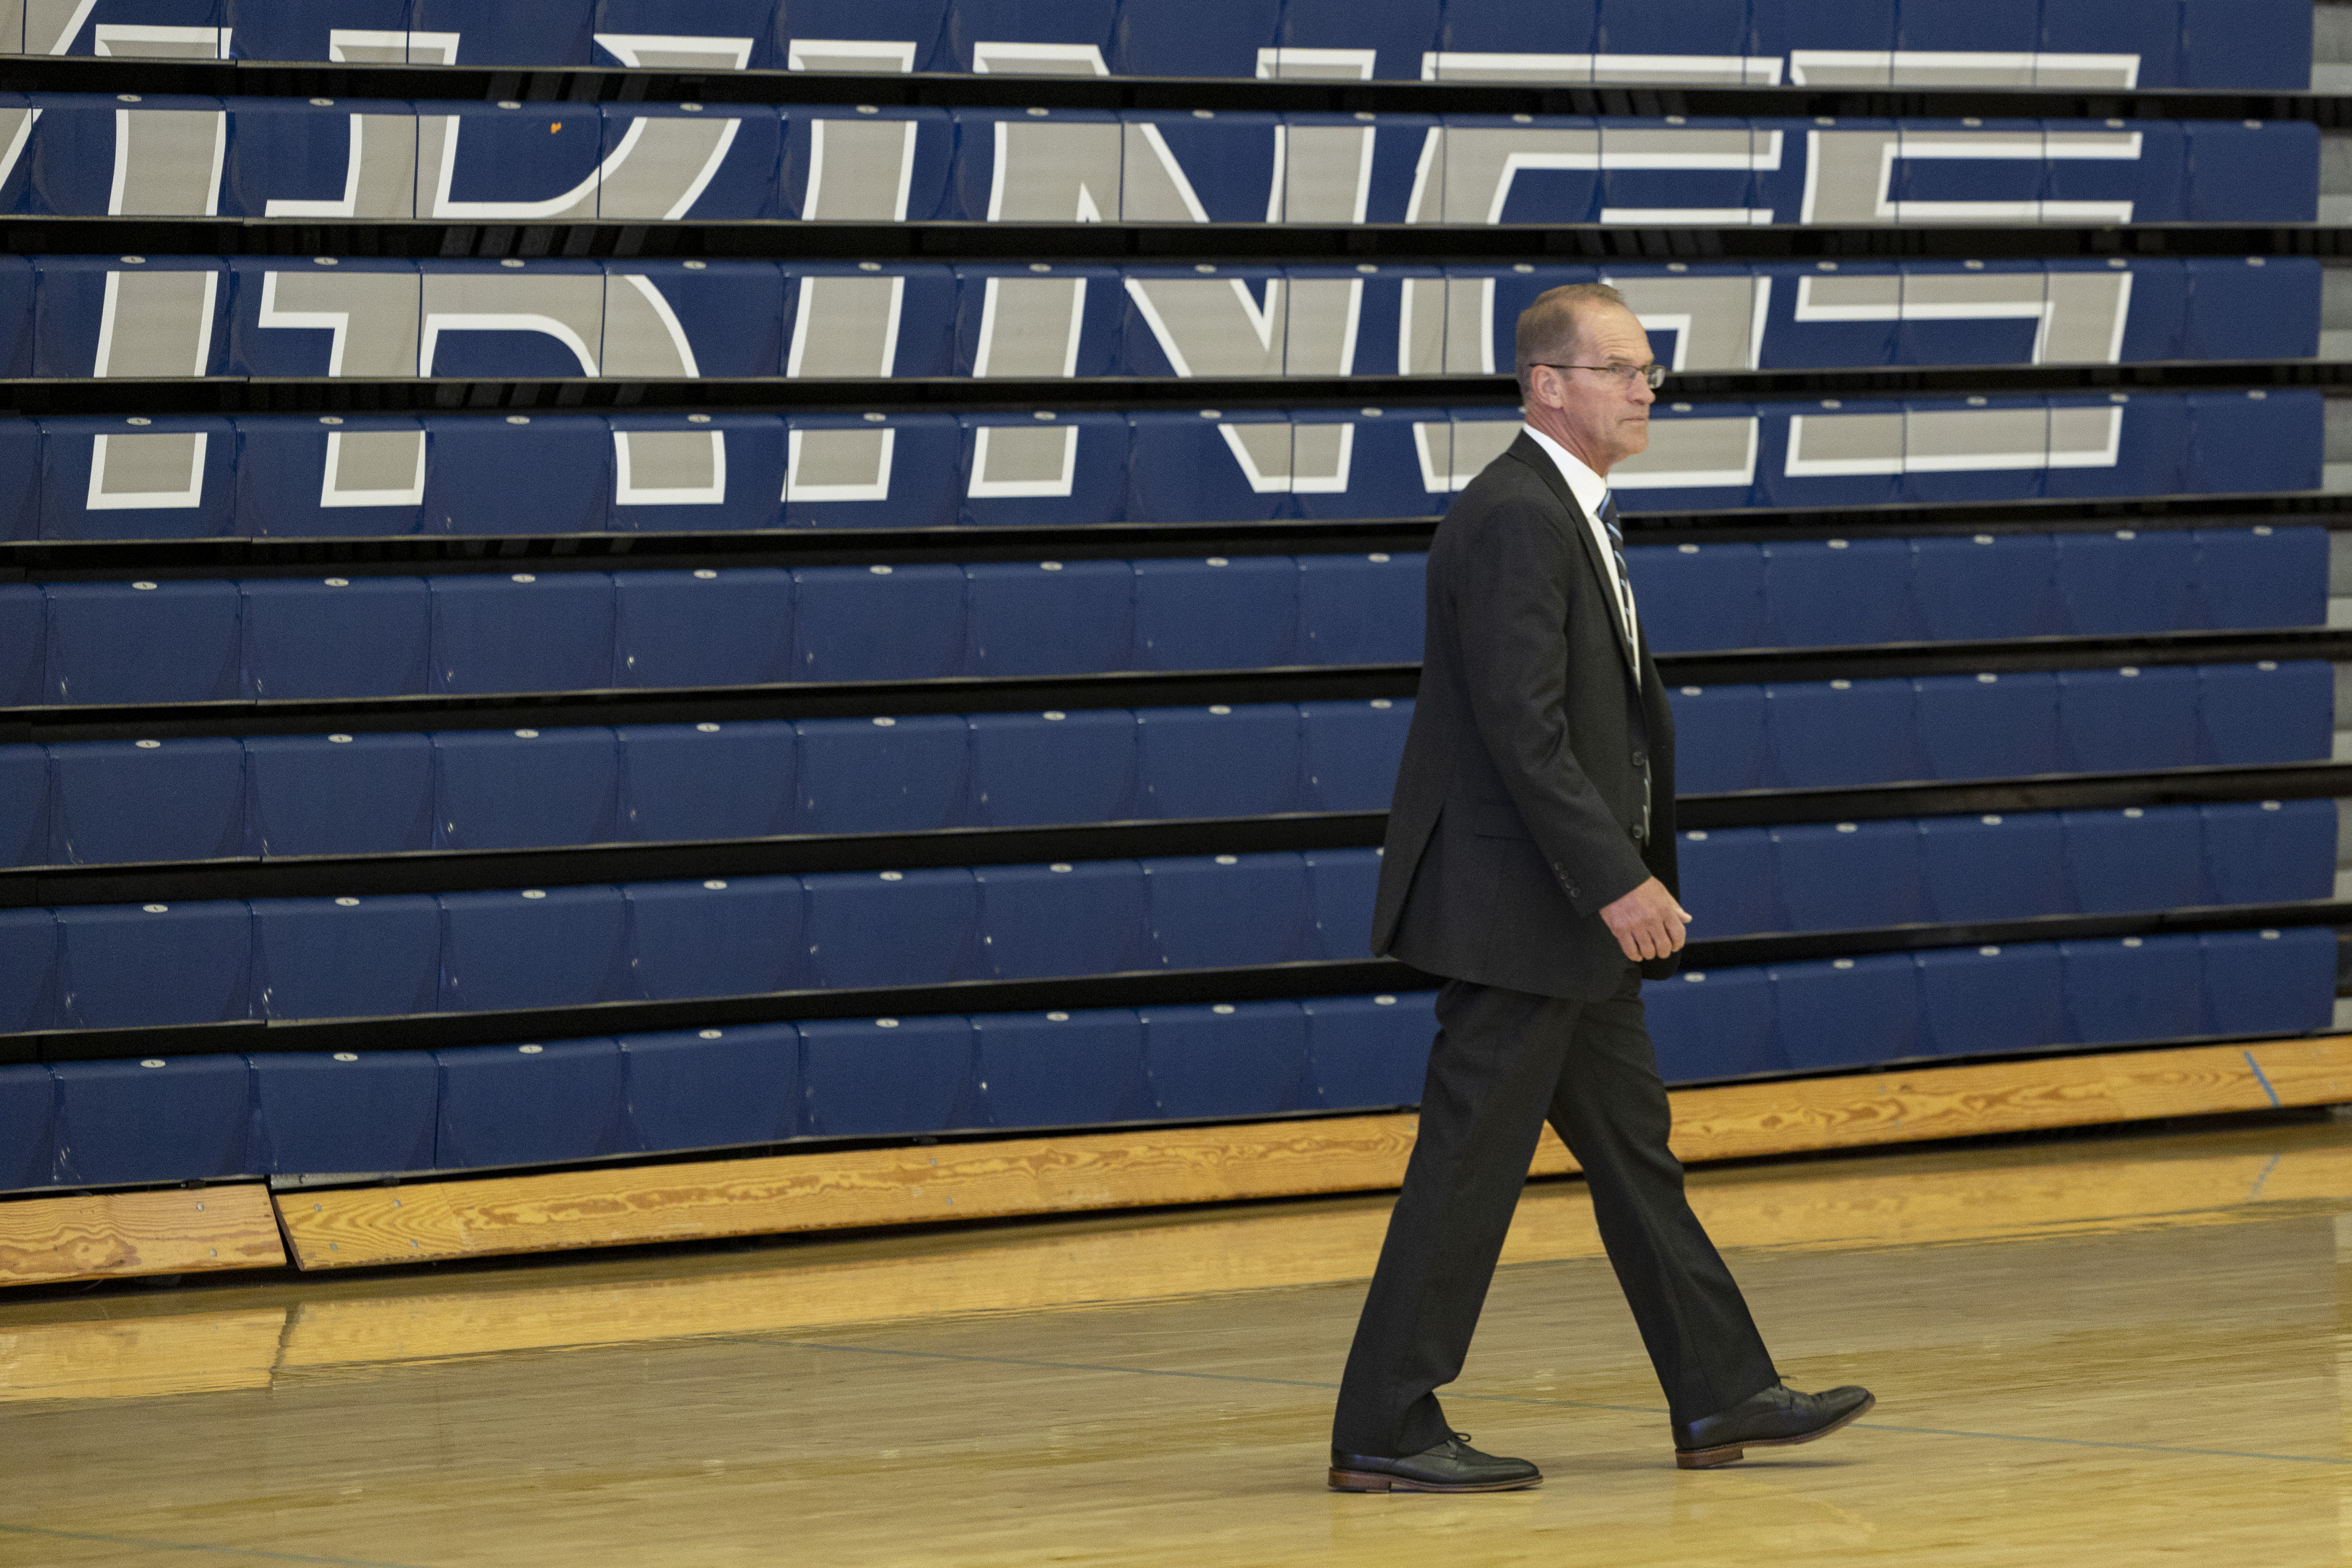 Sterk walks by the closed bleachers in Carver, which have the word 'vikings' painted on them